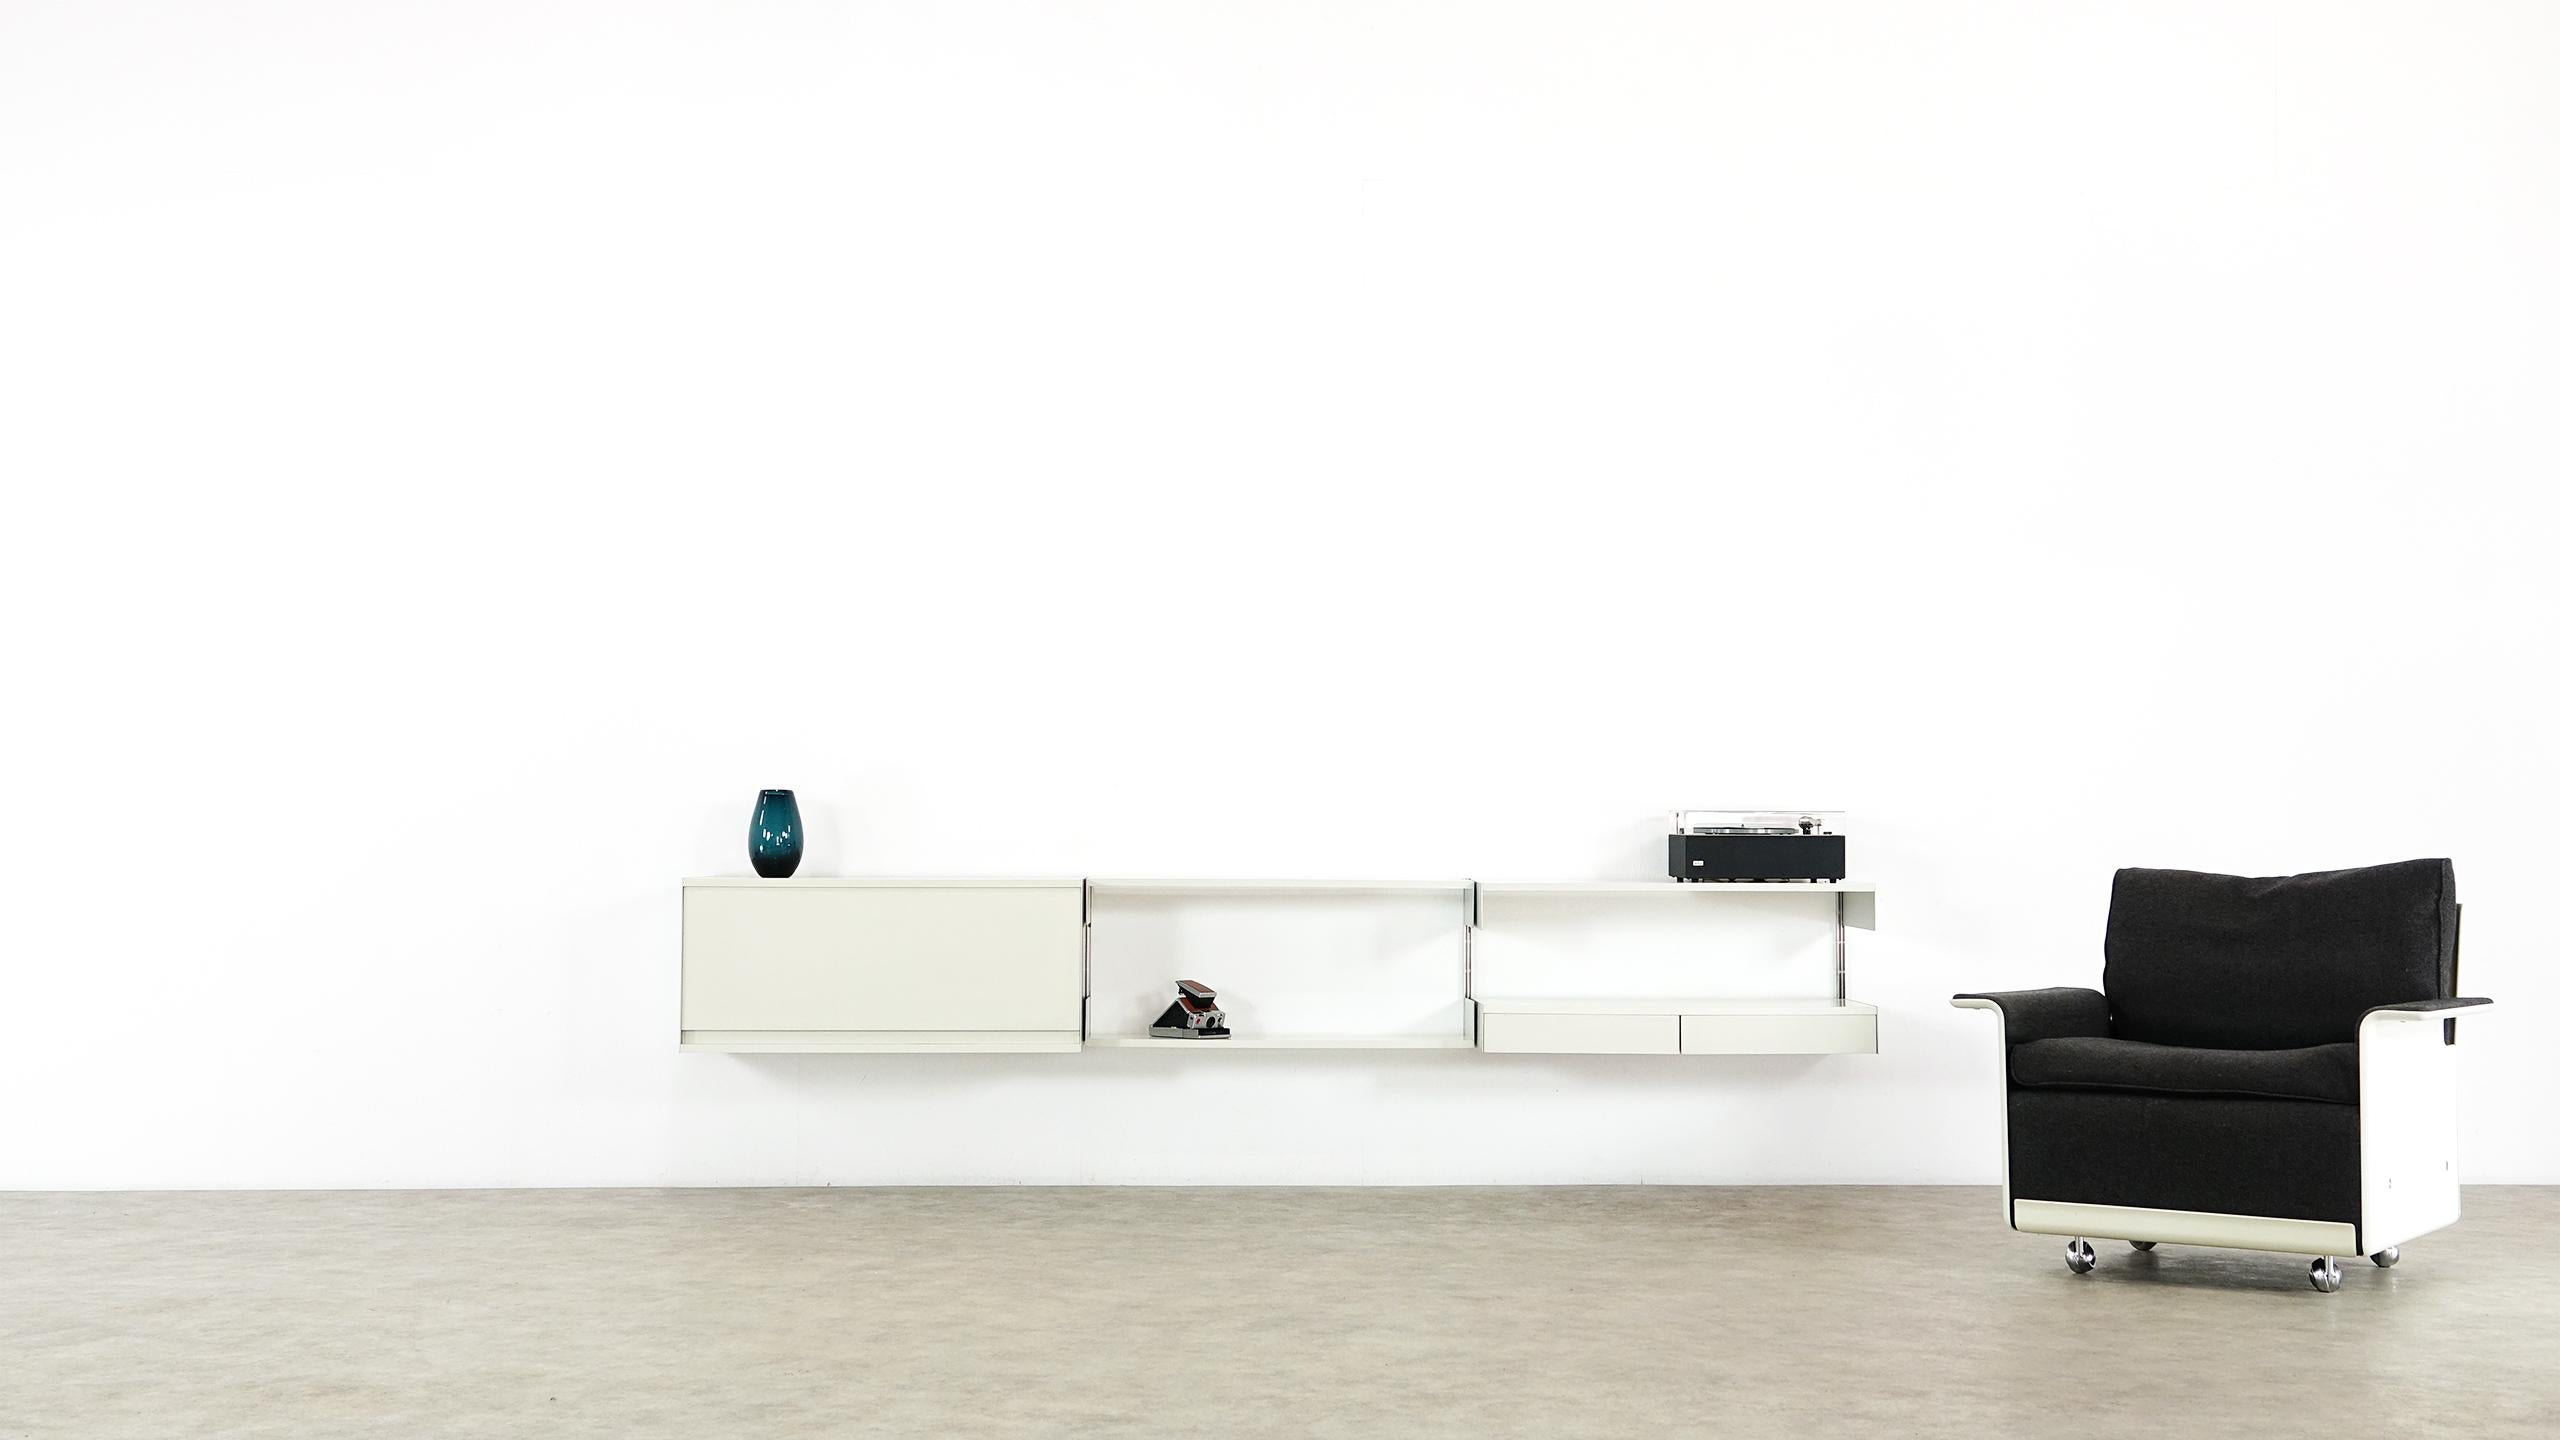 Dieter Rams sideboard 606 Universal shelving system for Vitsœ, Germany, 1965.

Measures: Container 90.5 cm wide 40.0 cm high 37.5 cm deep

Boards small 90.5 cm wide 11 cm high 23.5 cm deep

Board large 90.5 cm wide 11 cm high 37.5 cm